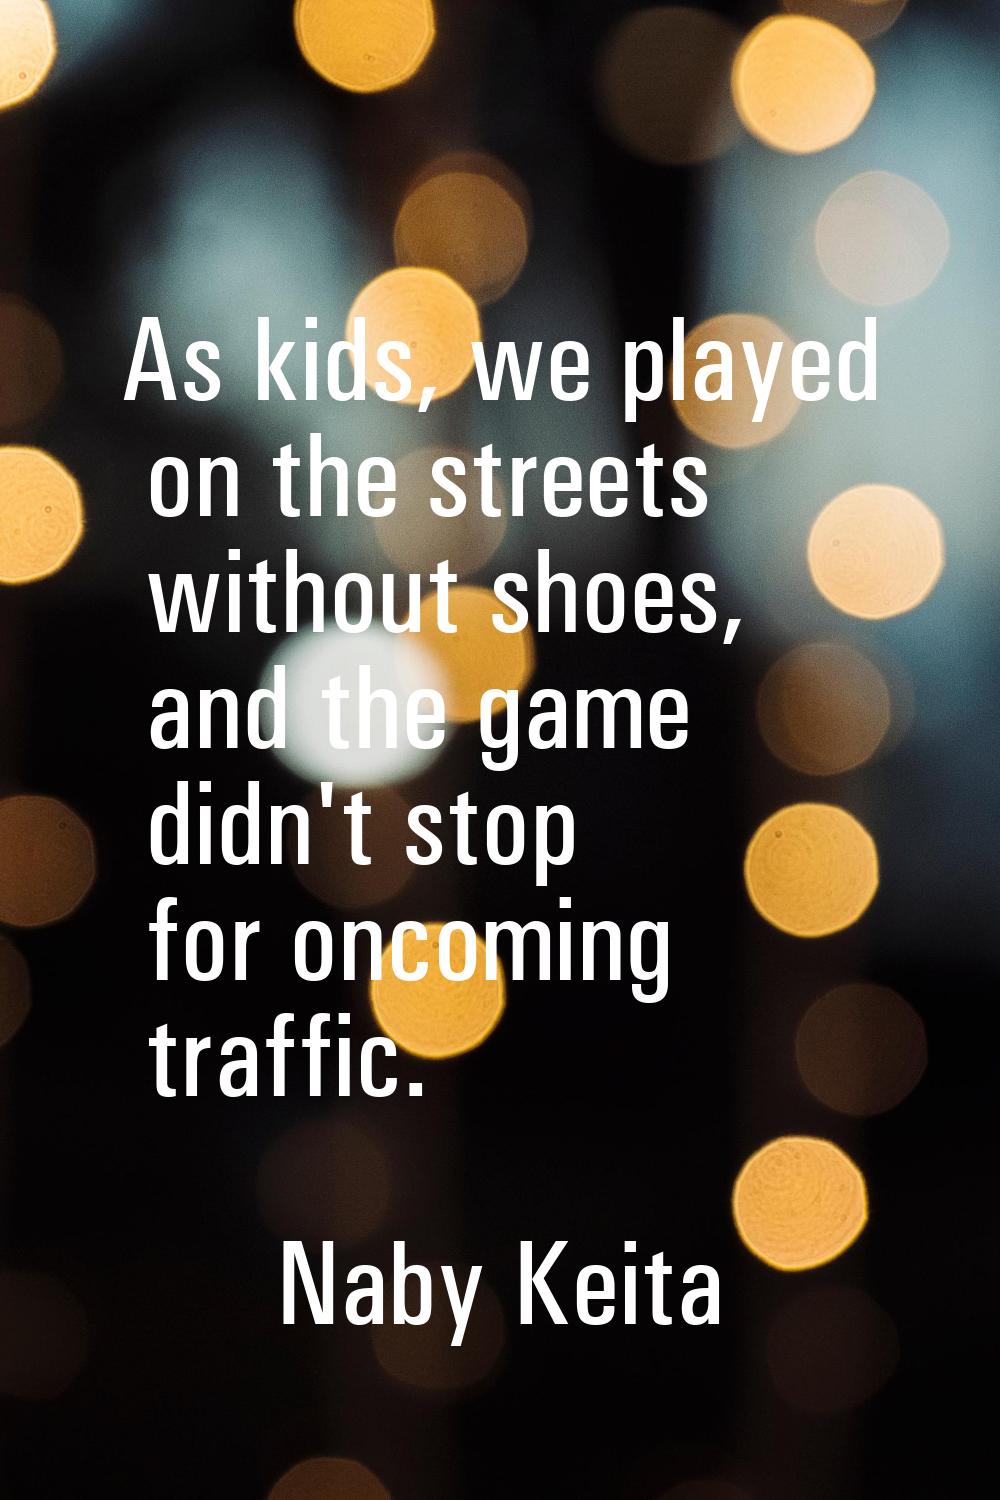 As kids, we played on the streets without shoes, and the game didn't stop for oncoming traffic.